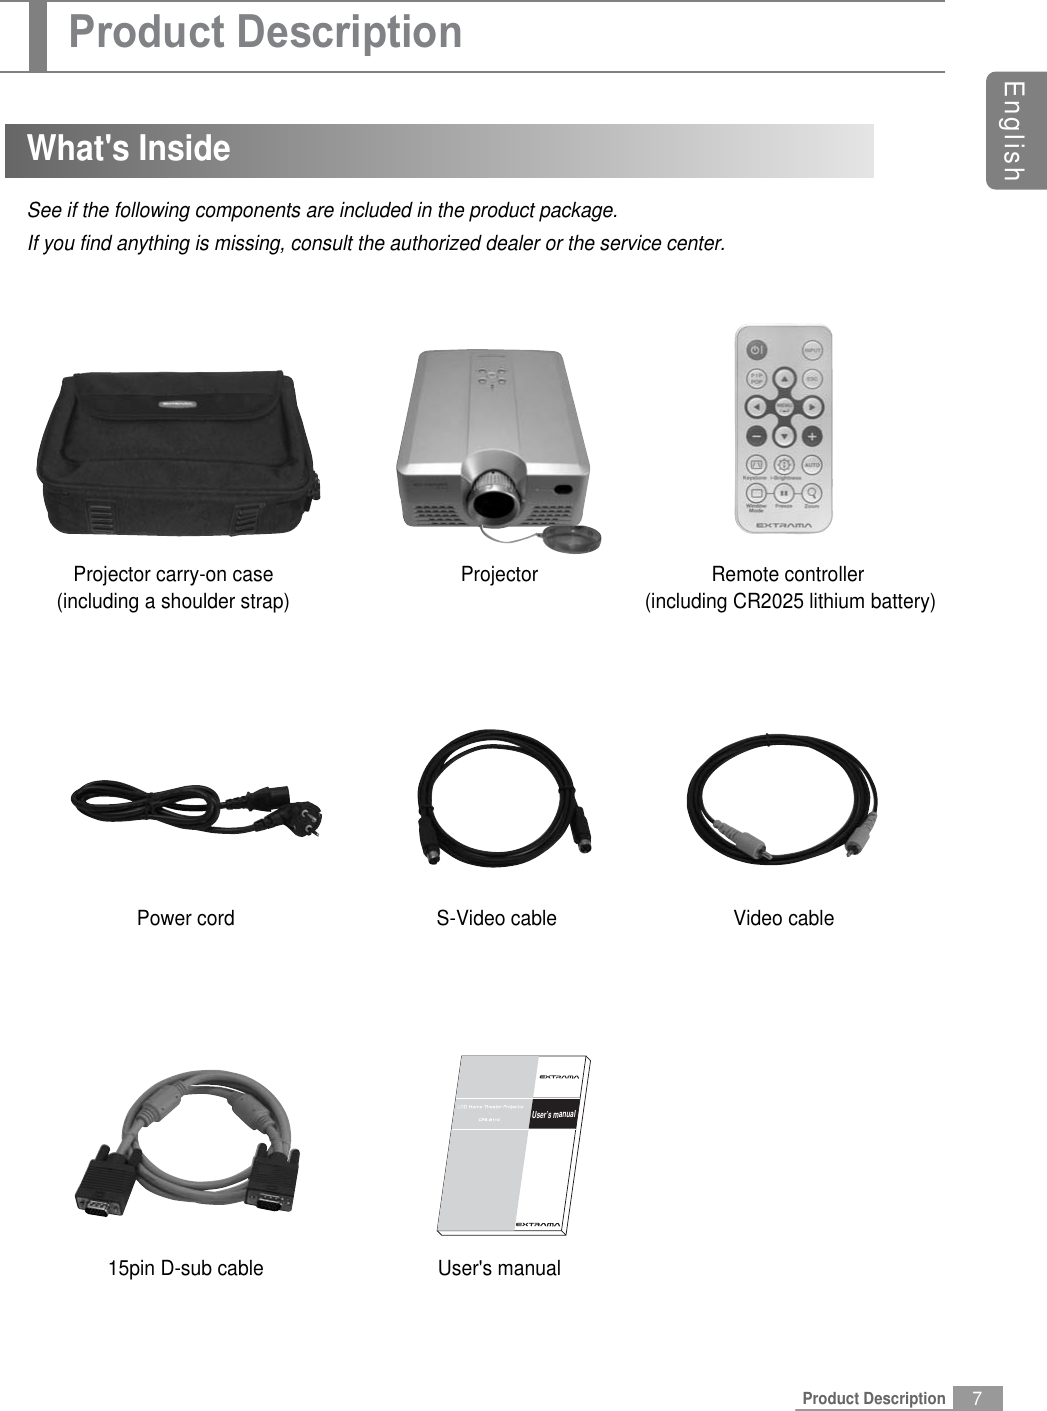 7EnglishProduct DescriptionProduct DescriptionWhat&apos;s InsideSee if the following components are included in the product package.If you find anything is missing, consult the authorized dealer or the service center.User’s manualProjector carry-on case (including a shoulder strap)Projector Remote controller(including CR2025 lithium battery)Video cablePower cord15pin D-sub cableS-Video cableUser&apos;s manual